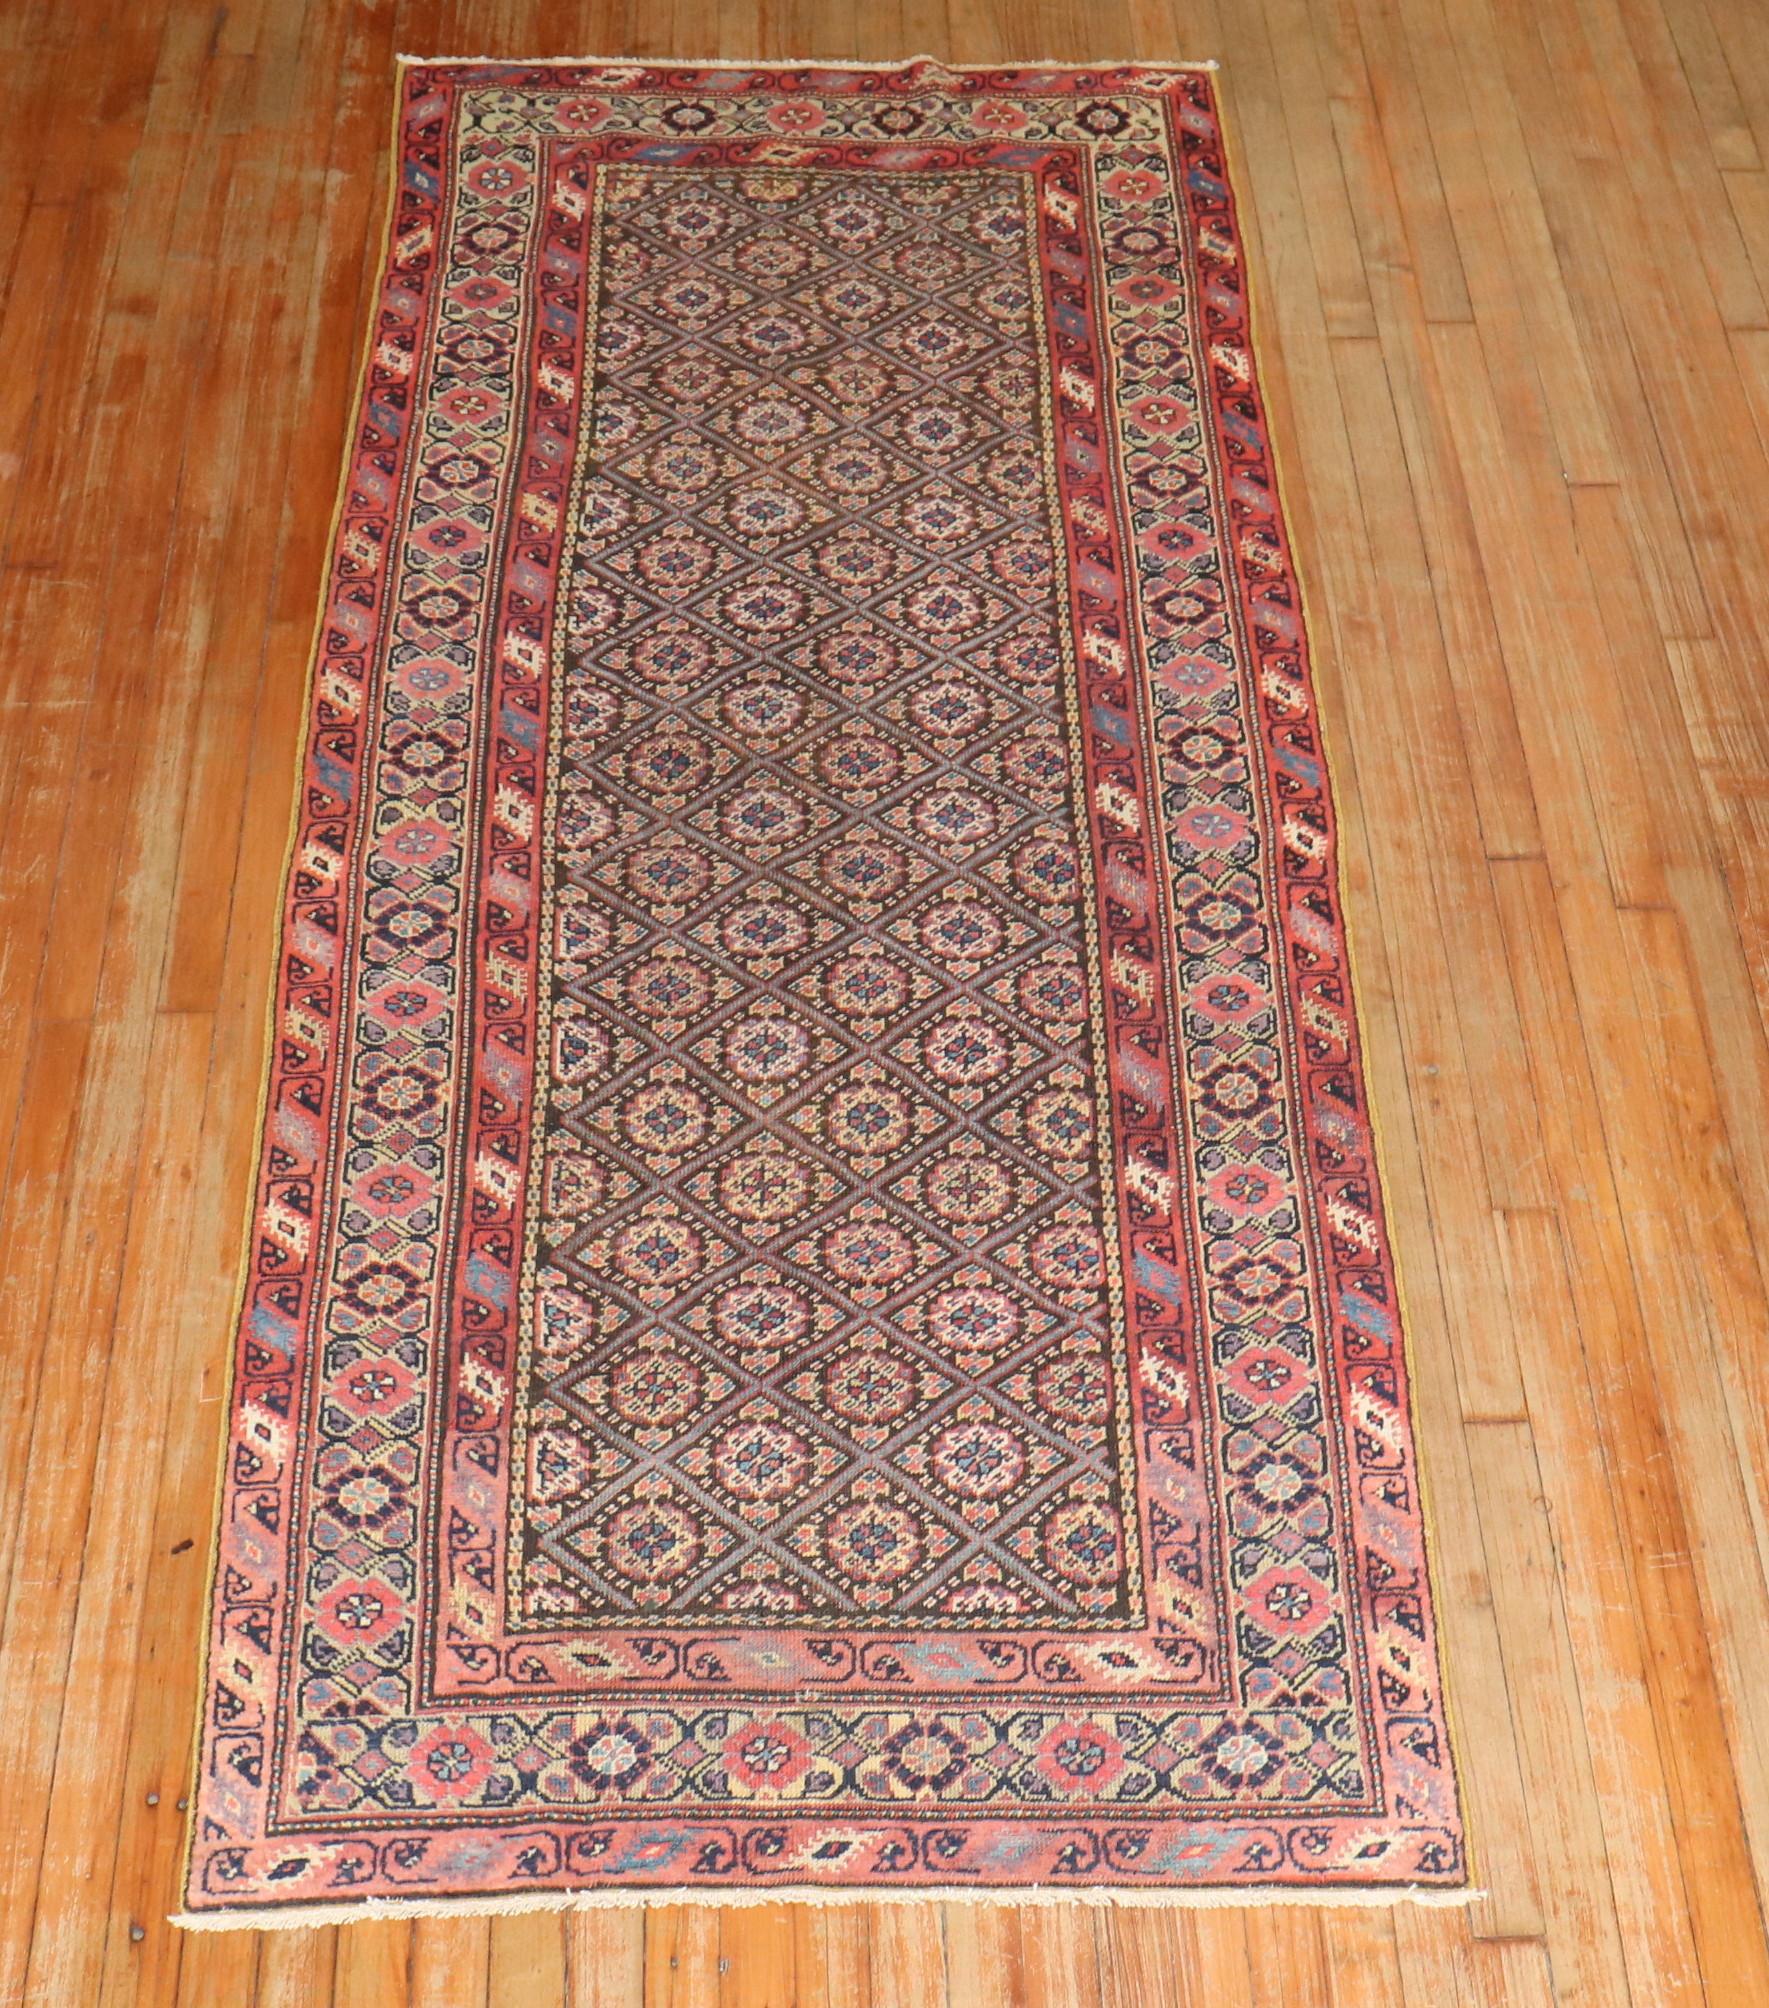 An authentic handmade antique Persian Ferehan runner.

3'5'' x 8'2''

Designed for a regional aristocratic clientele, the Ferahan region of West Central Persia developed a distinctive rug weaving tradition in the 19th century that blended geometric